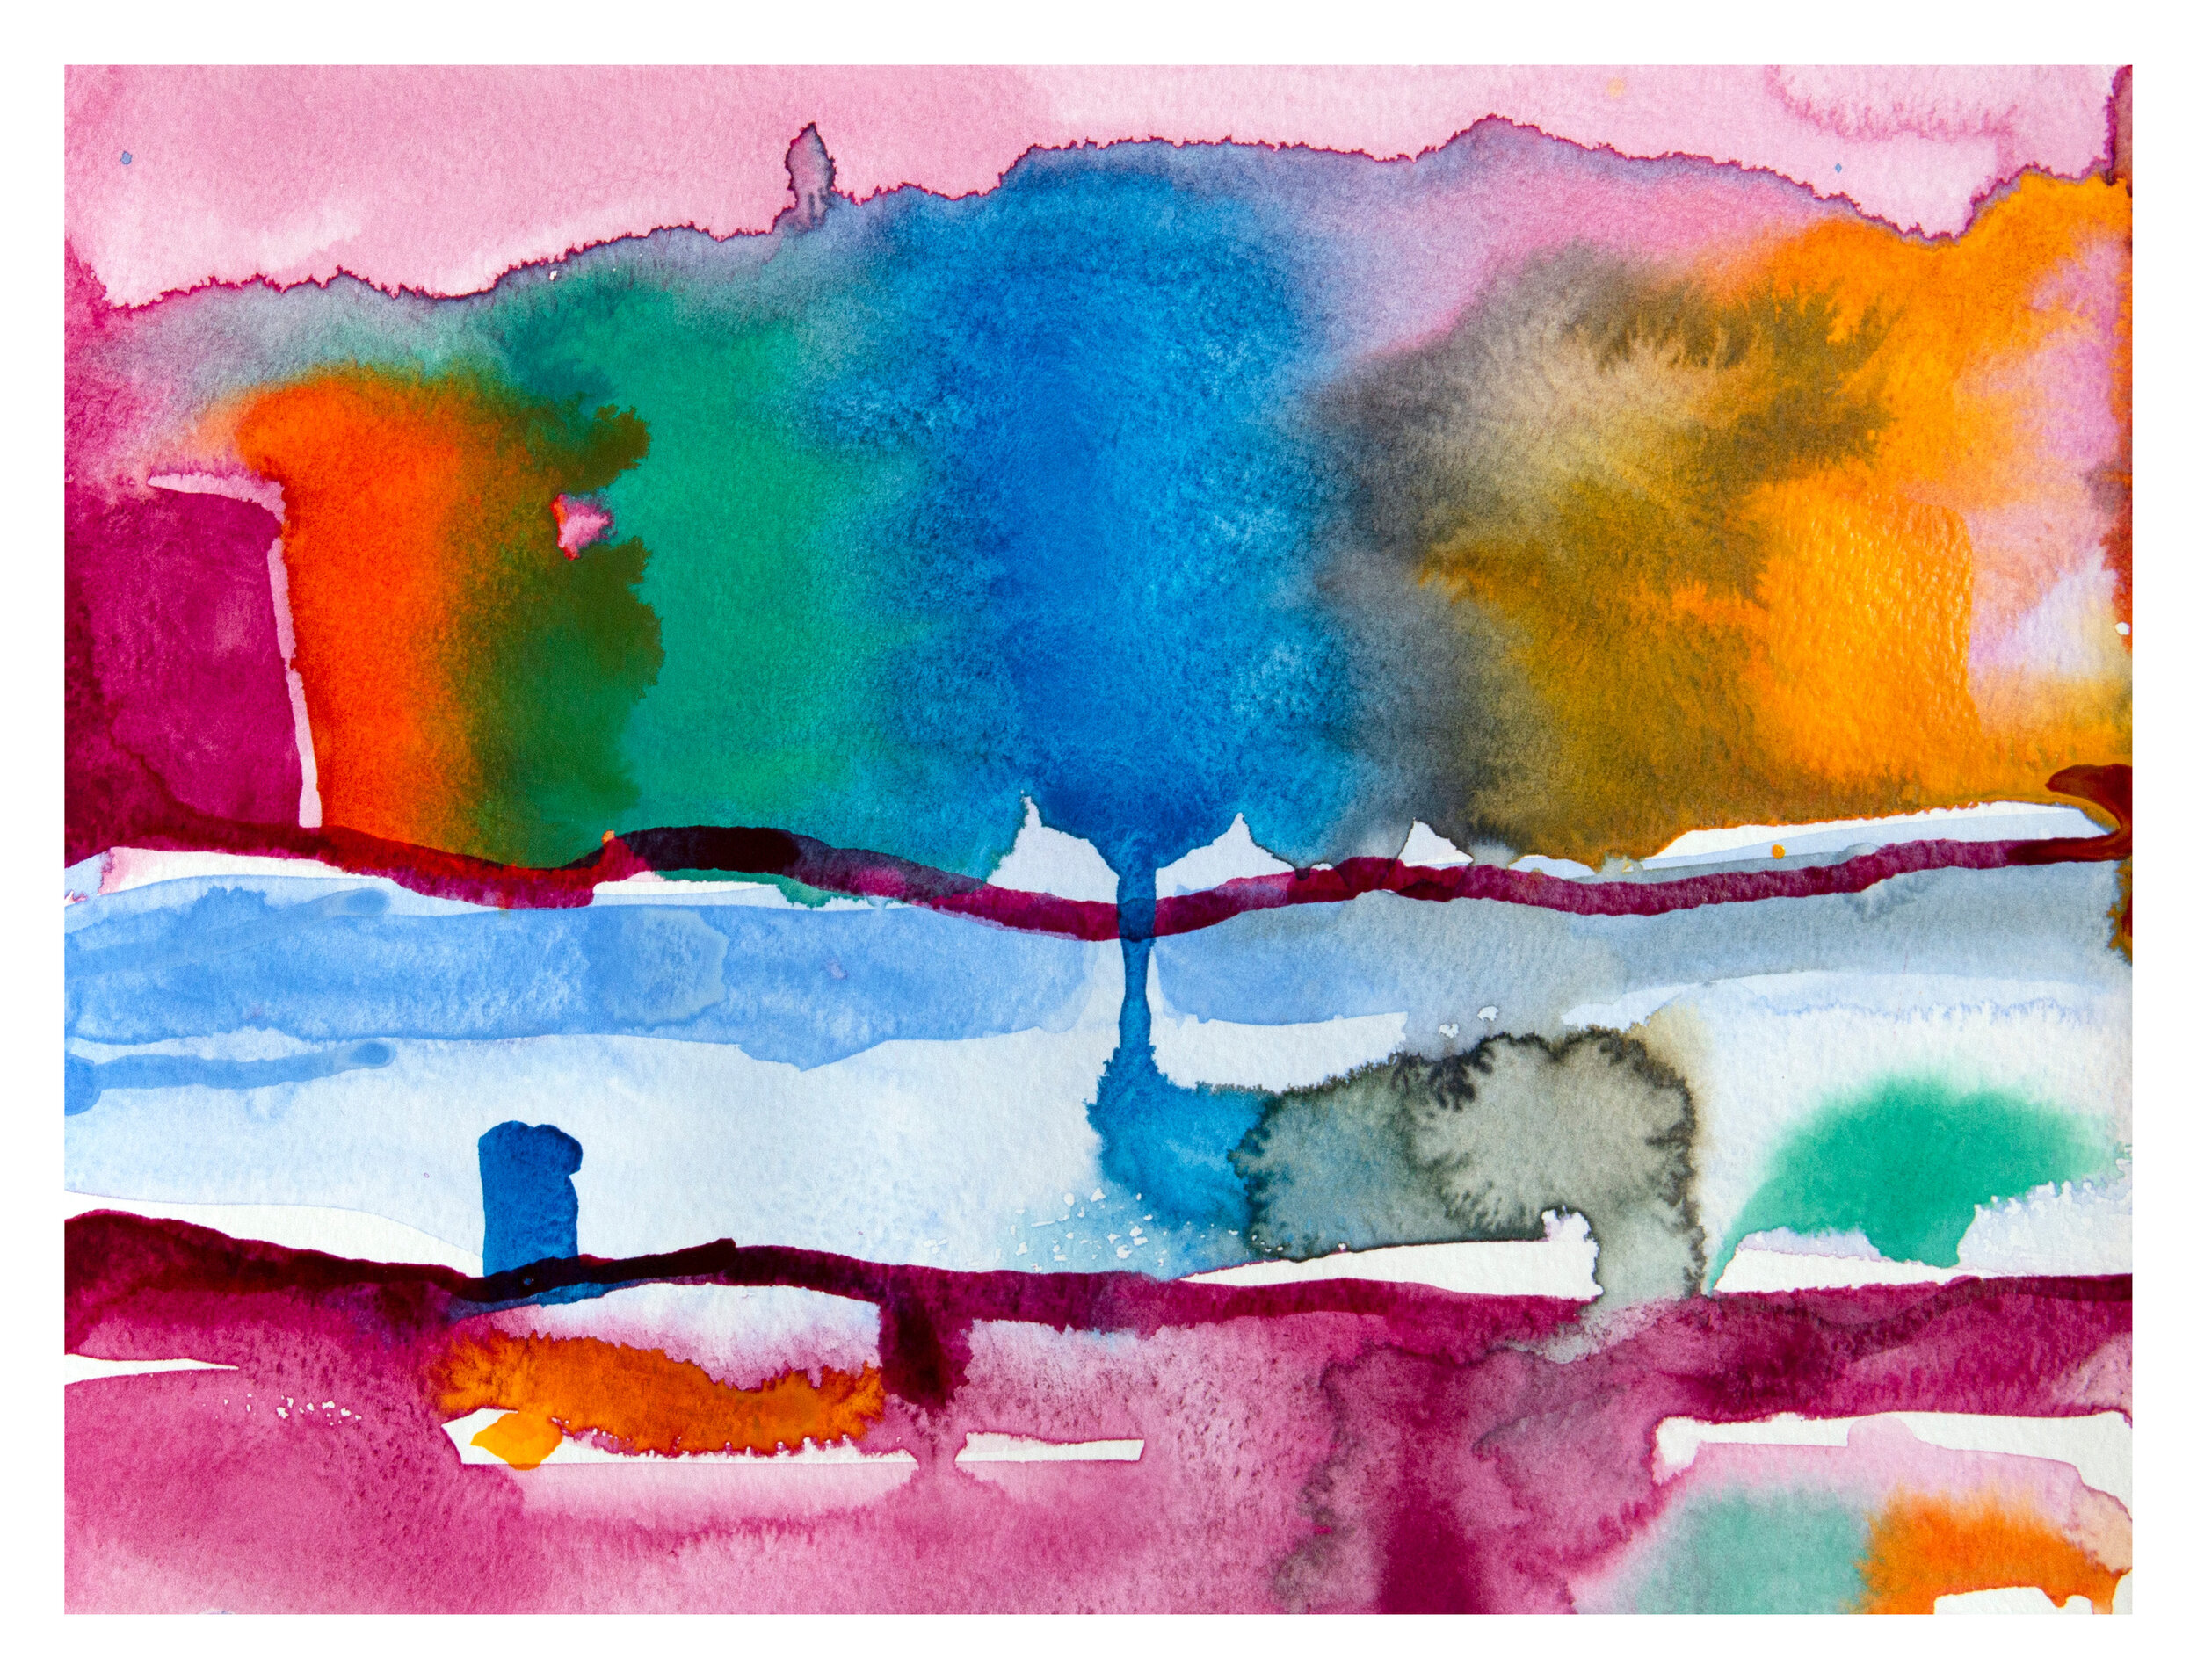 100 Watercolors for Spring (#58)